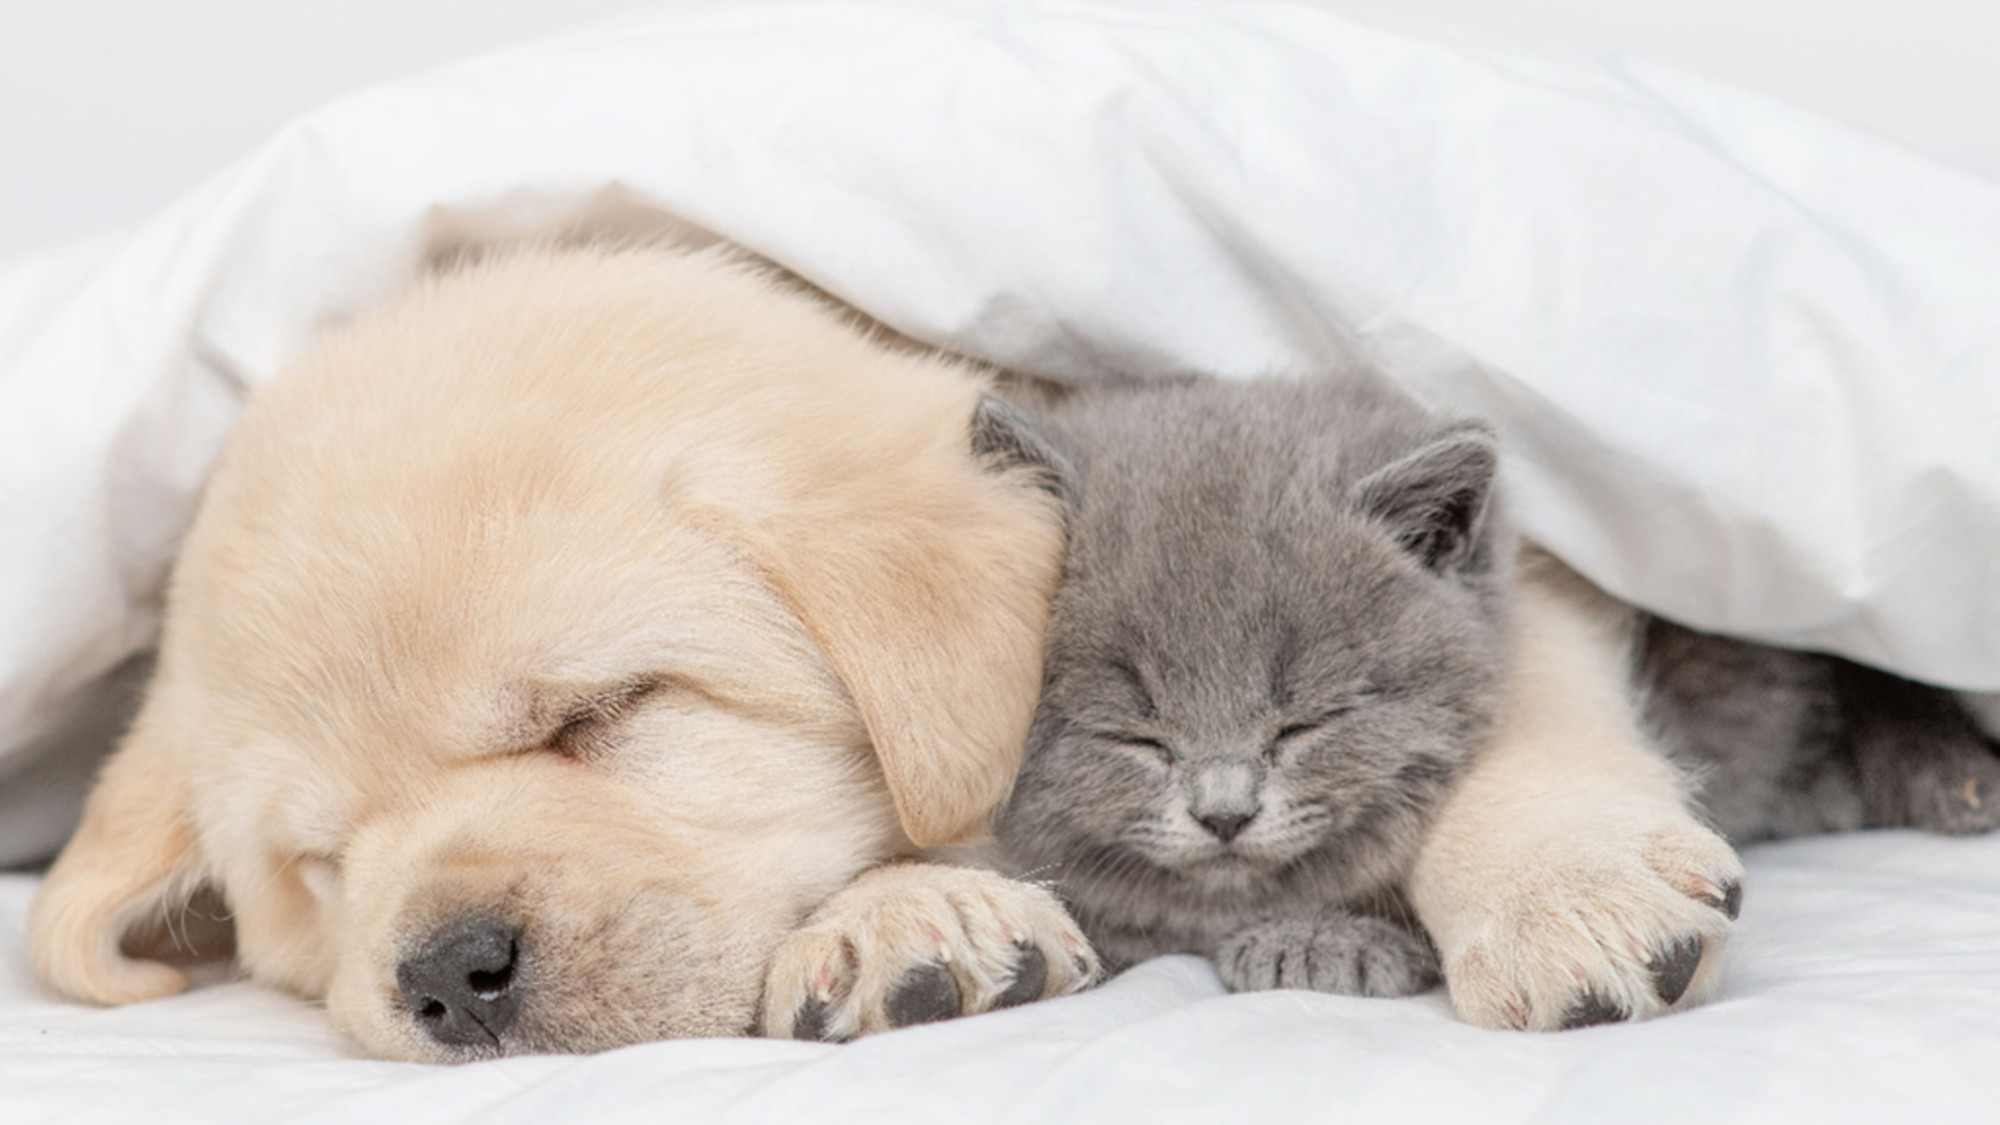 A Golden Retriever puppy and a baby cat snuggle up under a blanket